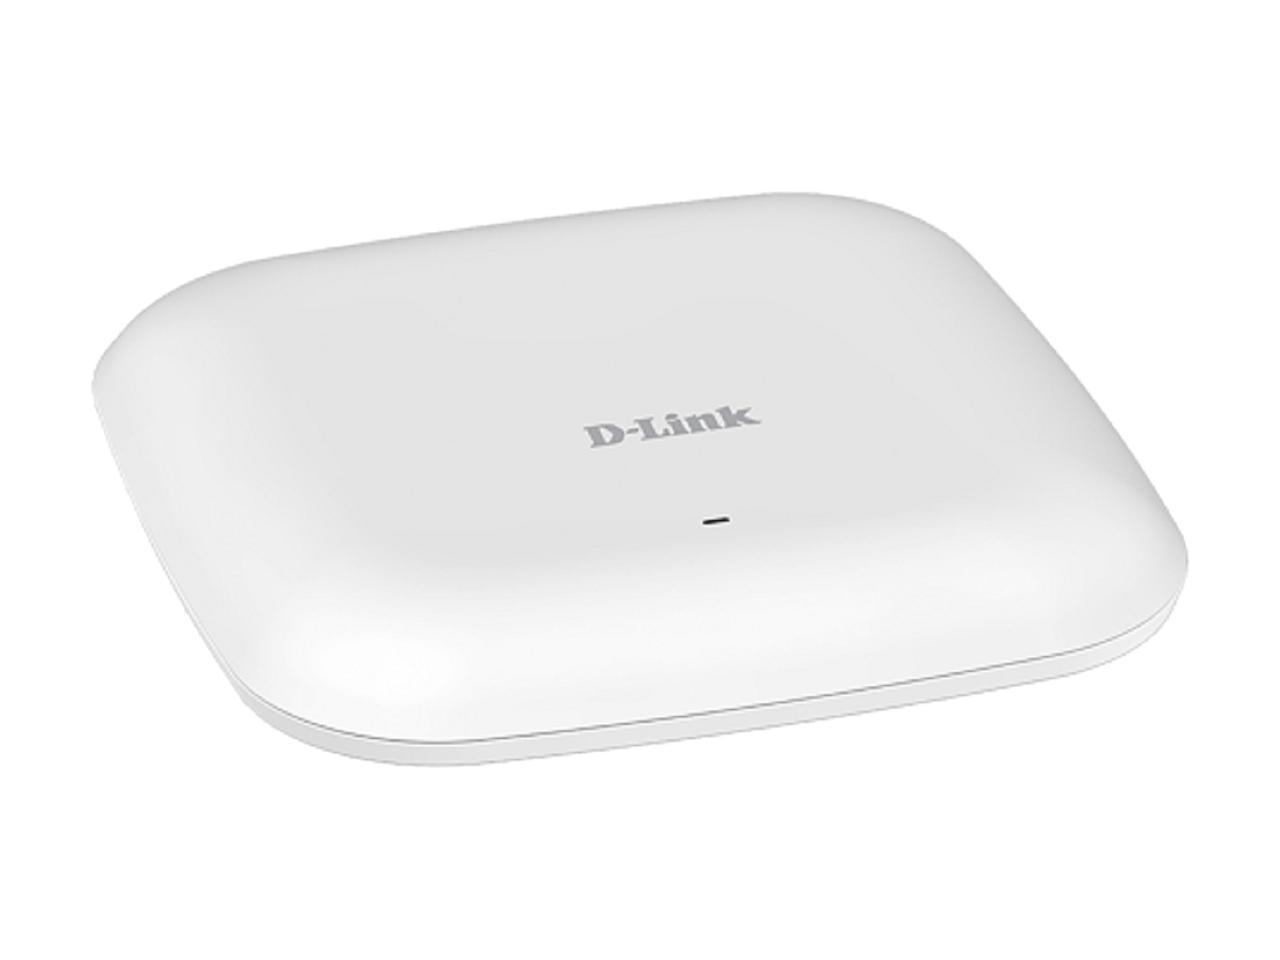 D-LINK SYSTEMS DAP-2610 WIRELESS AC1300 WAVE2 DUAL BAND GIGABIT POE ACCESS POINT